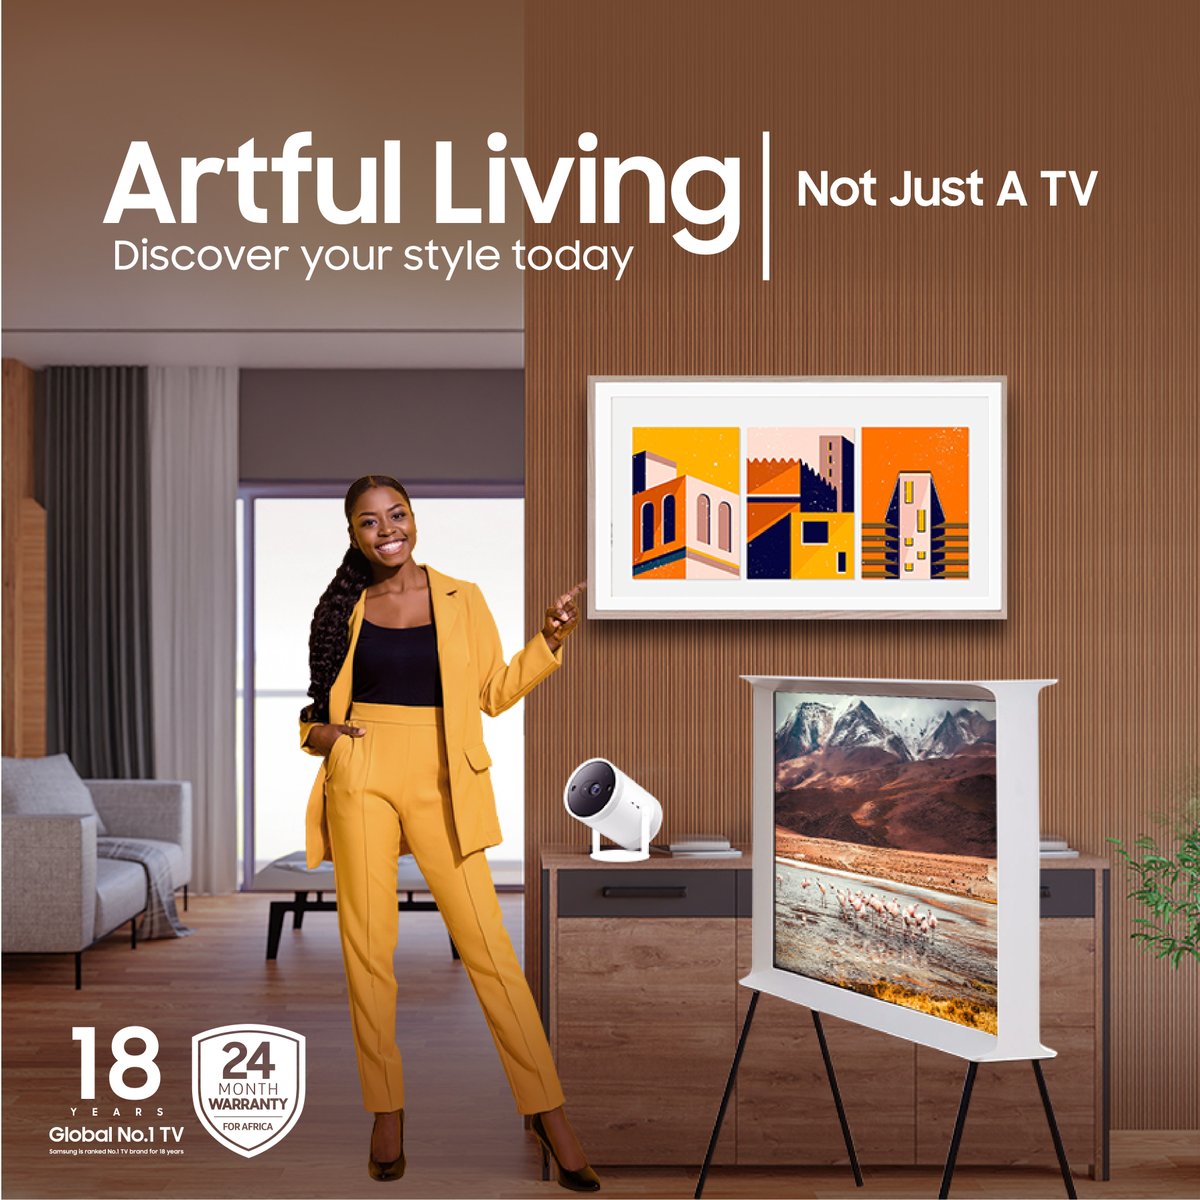 Explore Samsung Lifestyle TVs. #TheFrame turns into art, #TheSerif seamlessly blends with its unique 1-shappe profile, and #TheFreestyle Projector offers smart, portable entertainment.

Learn more : spr.ly/6011bUjeJ